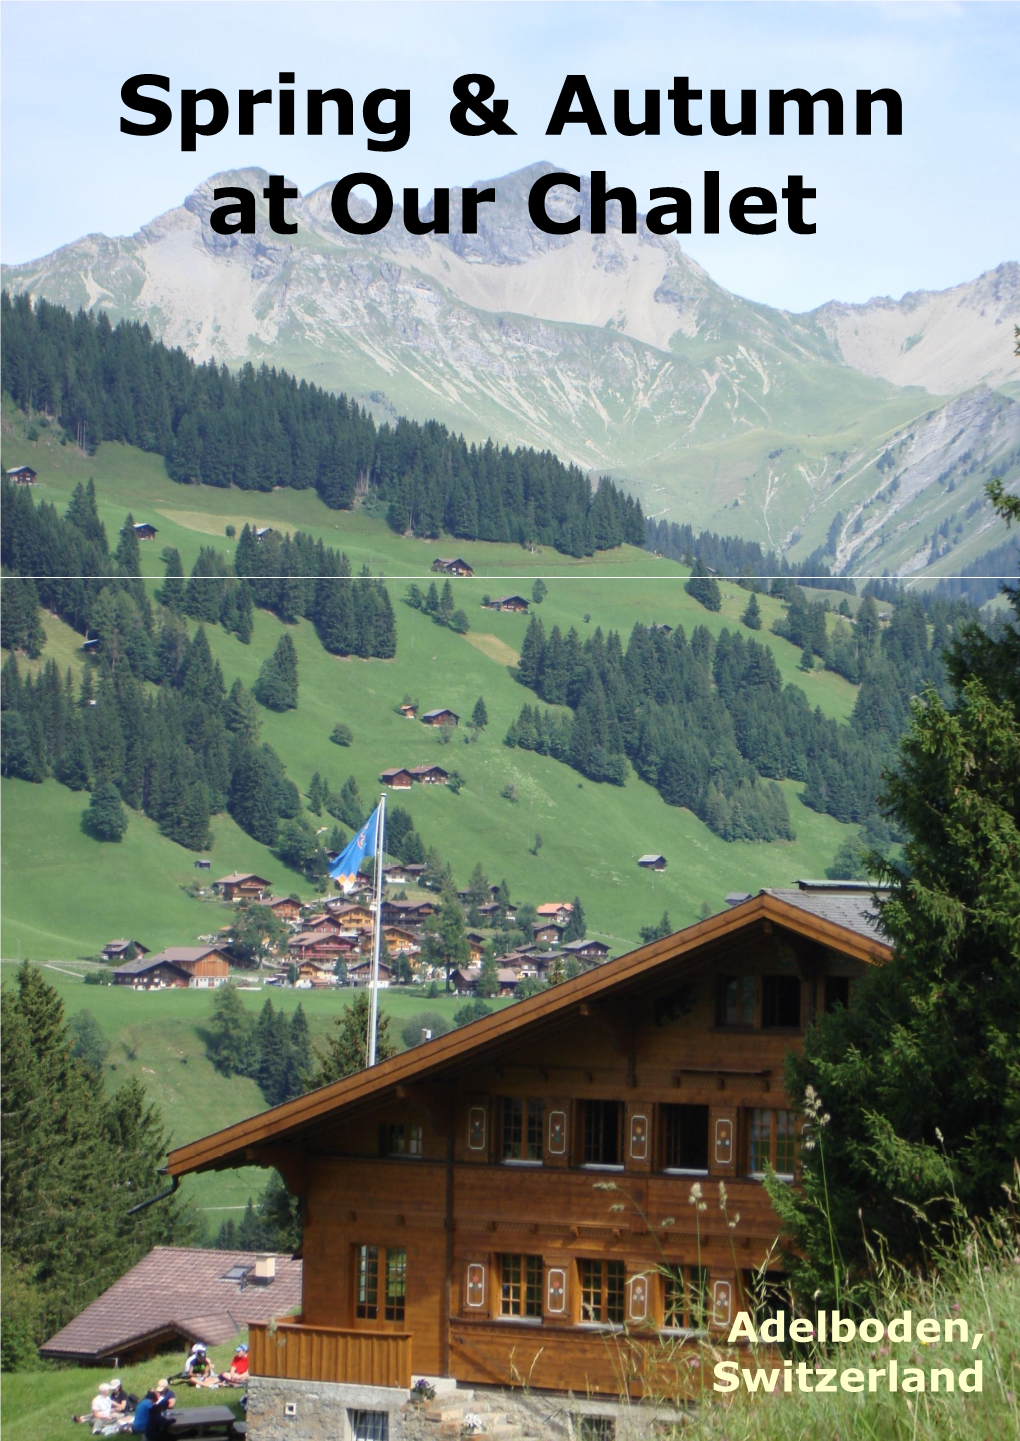 Spring & Autumn at Our Chalet